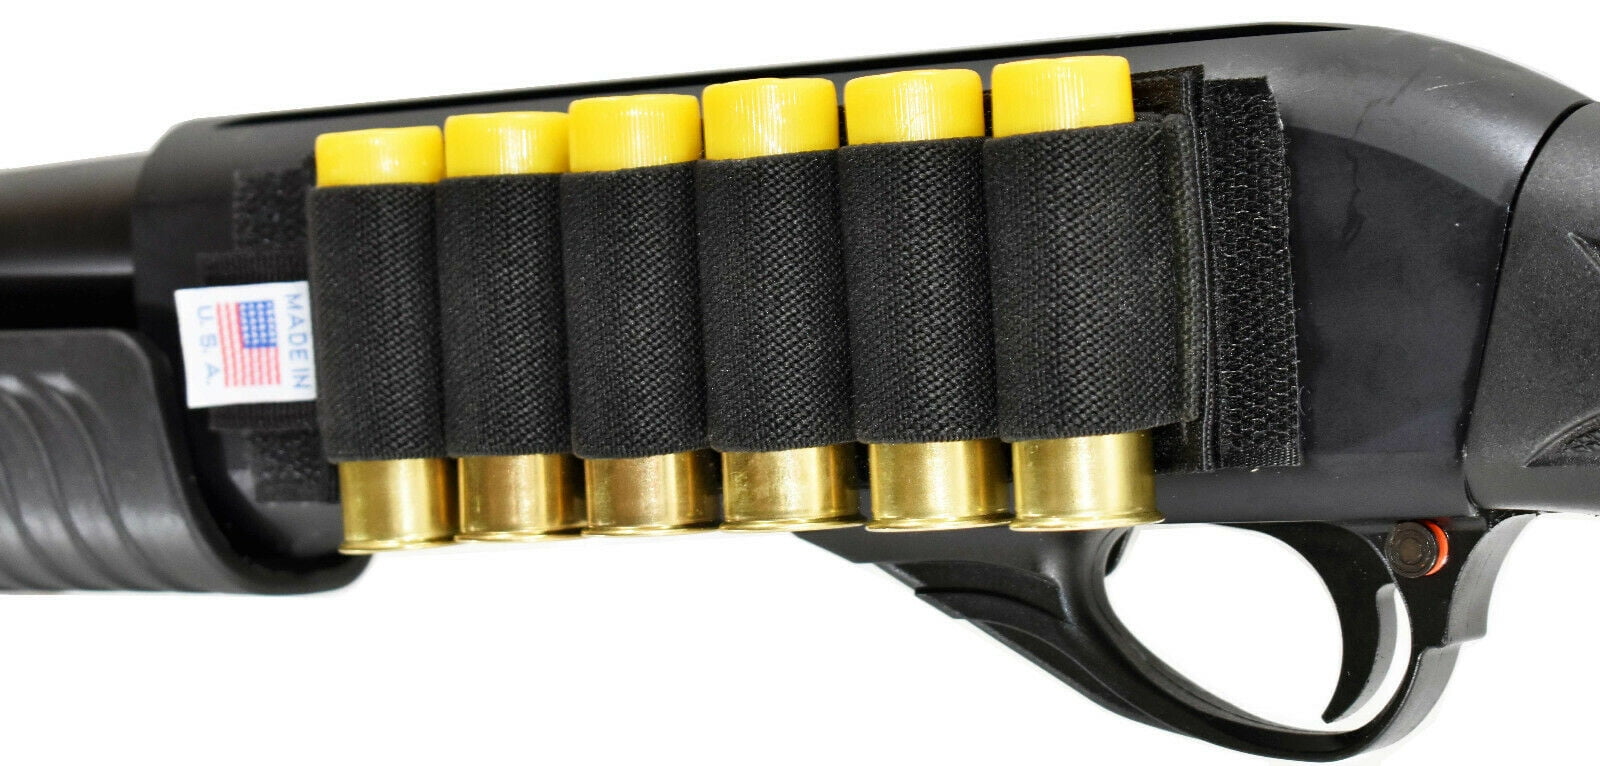 Trinity Shell Holder compatible with H&R Excell 12 gauge shotgun hunting gear. 